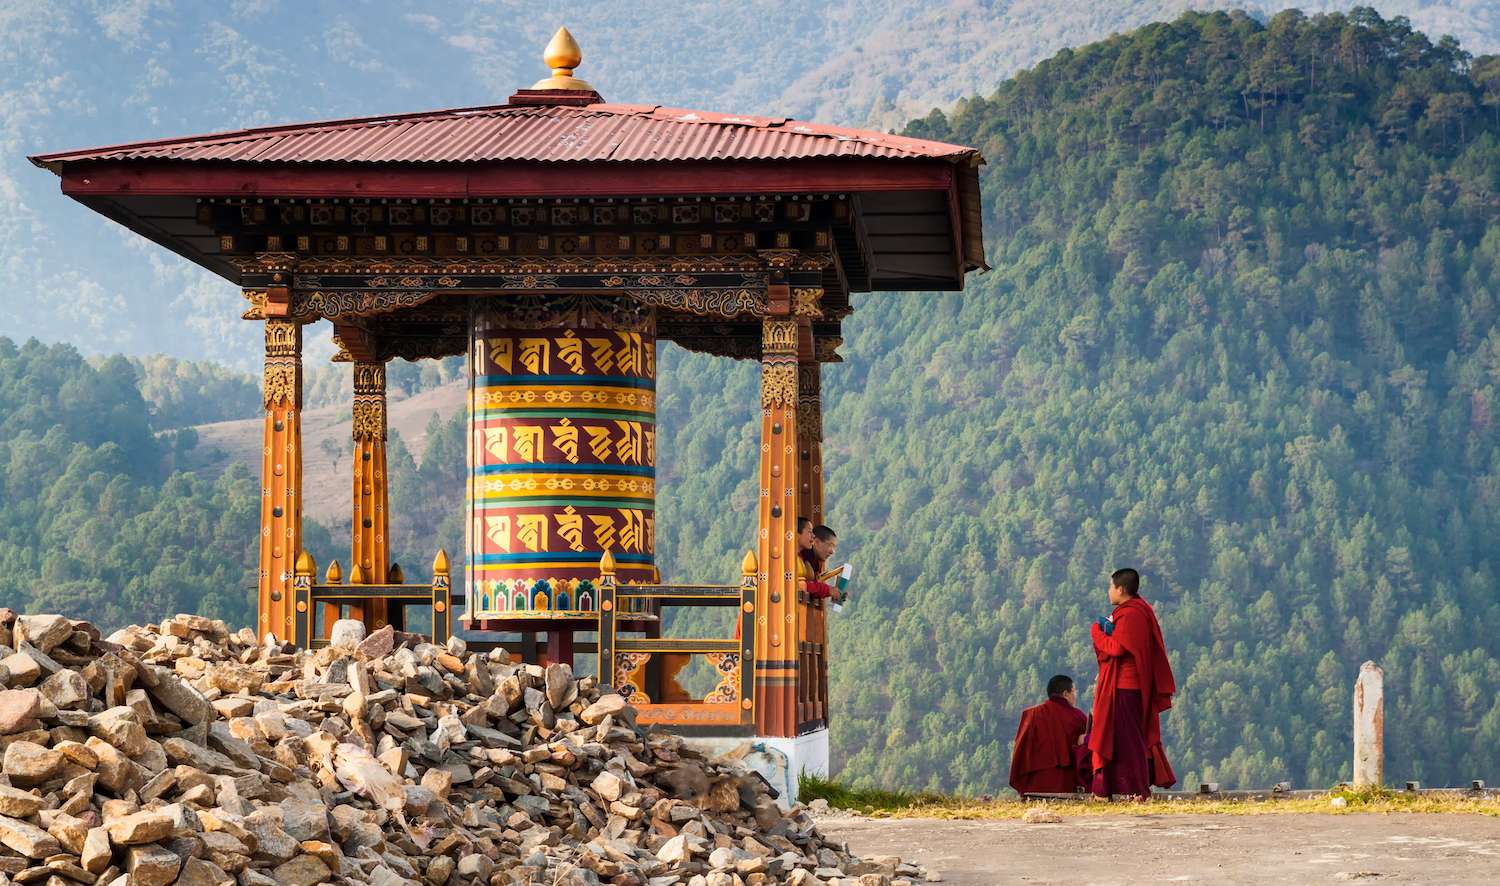 Punakha/Bhutan - March 1, 2016: young women monks of the Buddhist monastery in their traditional red robes before classes next to the prayer wheel against the background of the Himalayan mountains